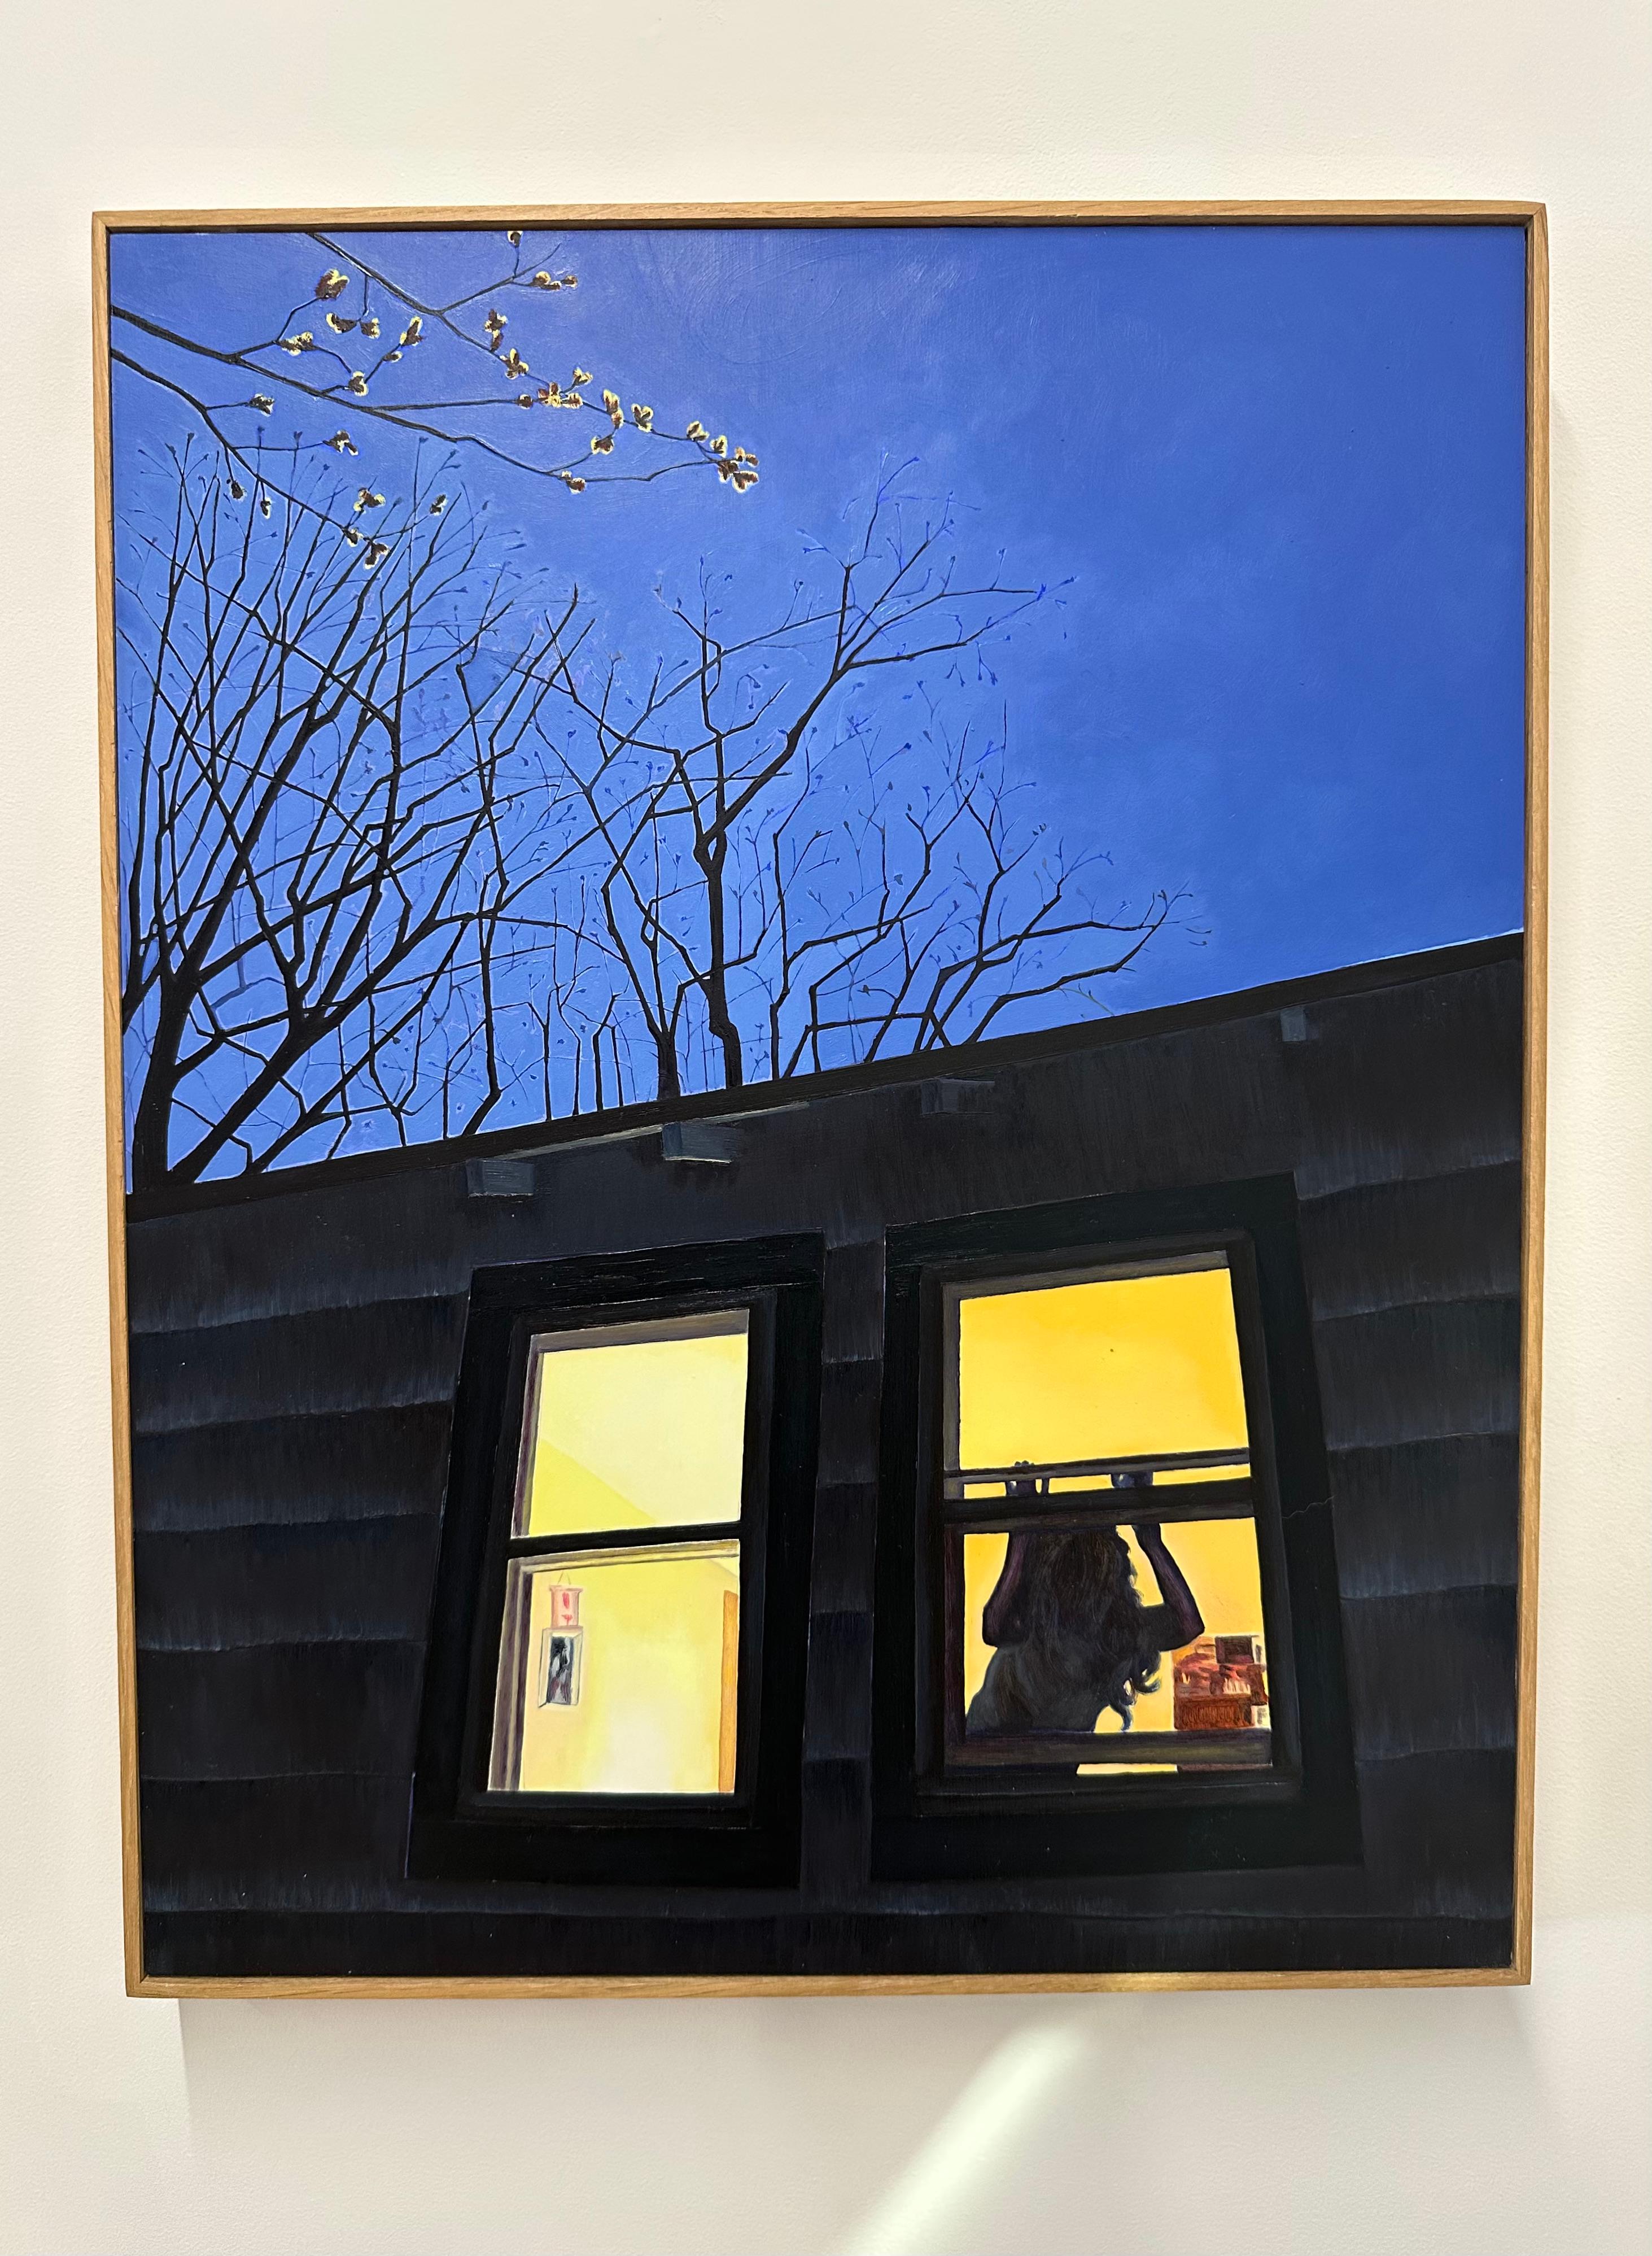 Spring Chill, Female Figure in Window, House at Night, Blue, Black Tree Branches - Painting by Amanda Acker